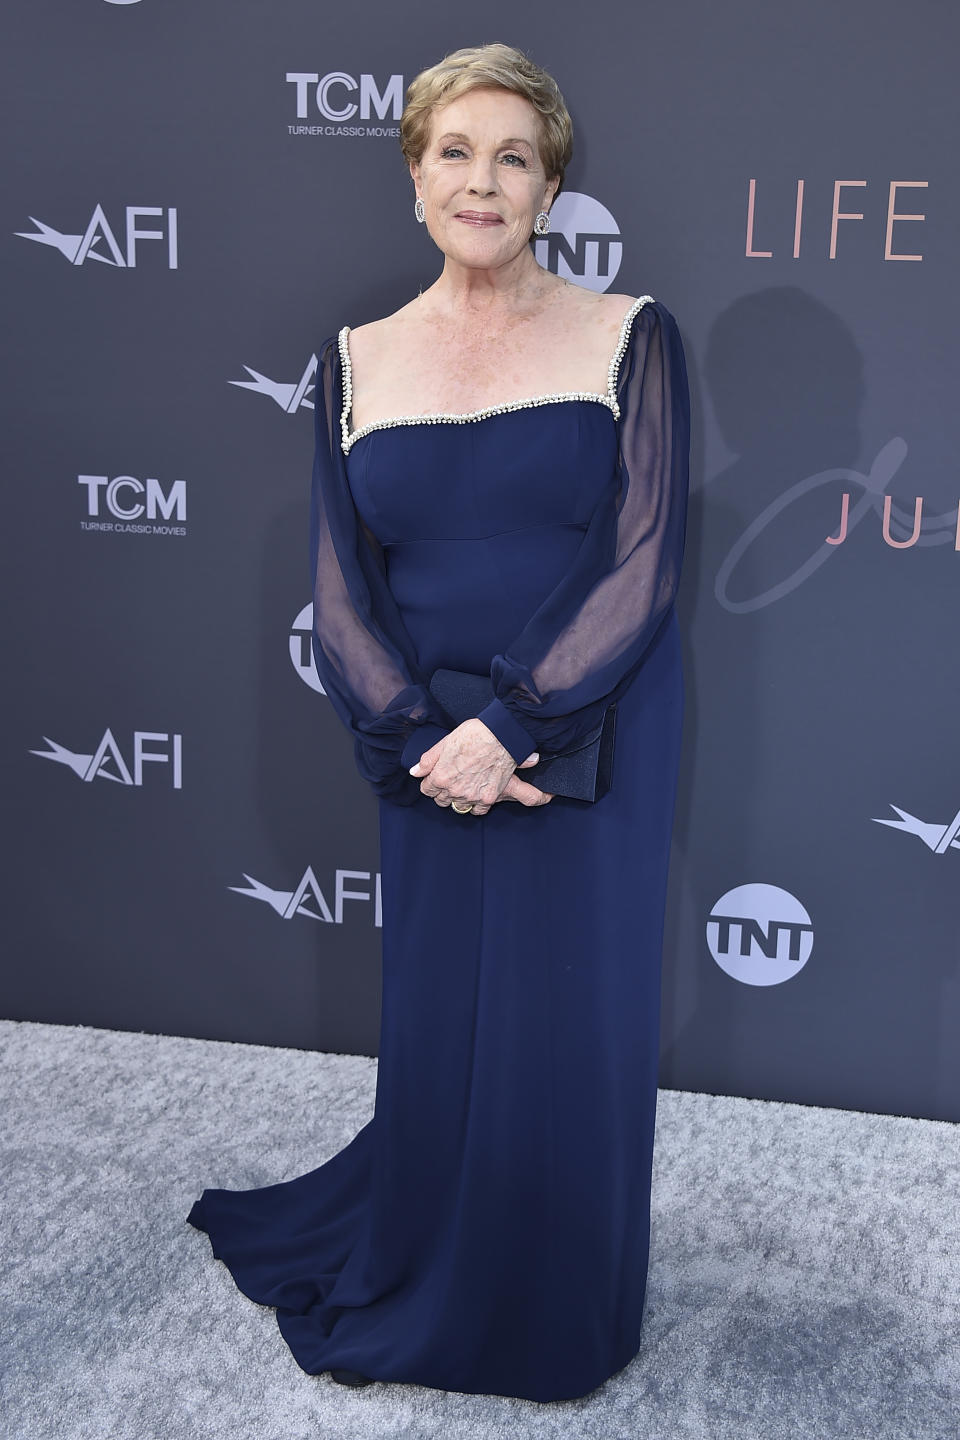 Julie Andrews arrives at the 48th AFI Life Achievement Award Honoring Julie Andrews on Thursday, June 9, 2022, at The Dolby Theatre in Los Angeles. (Photo by Jordan Strauss/Invision/AP)